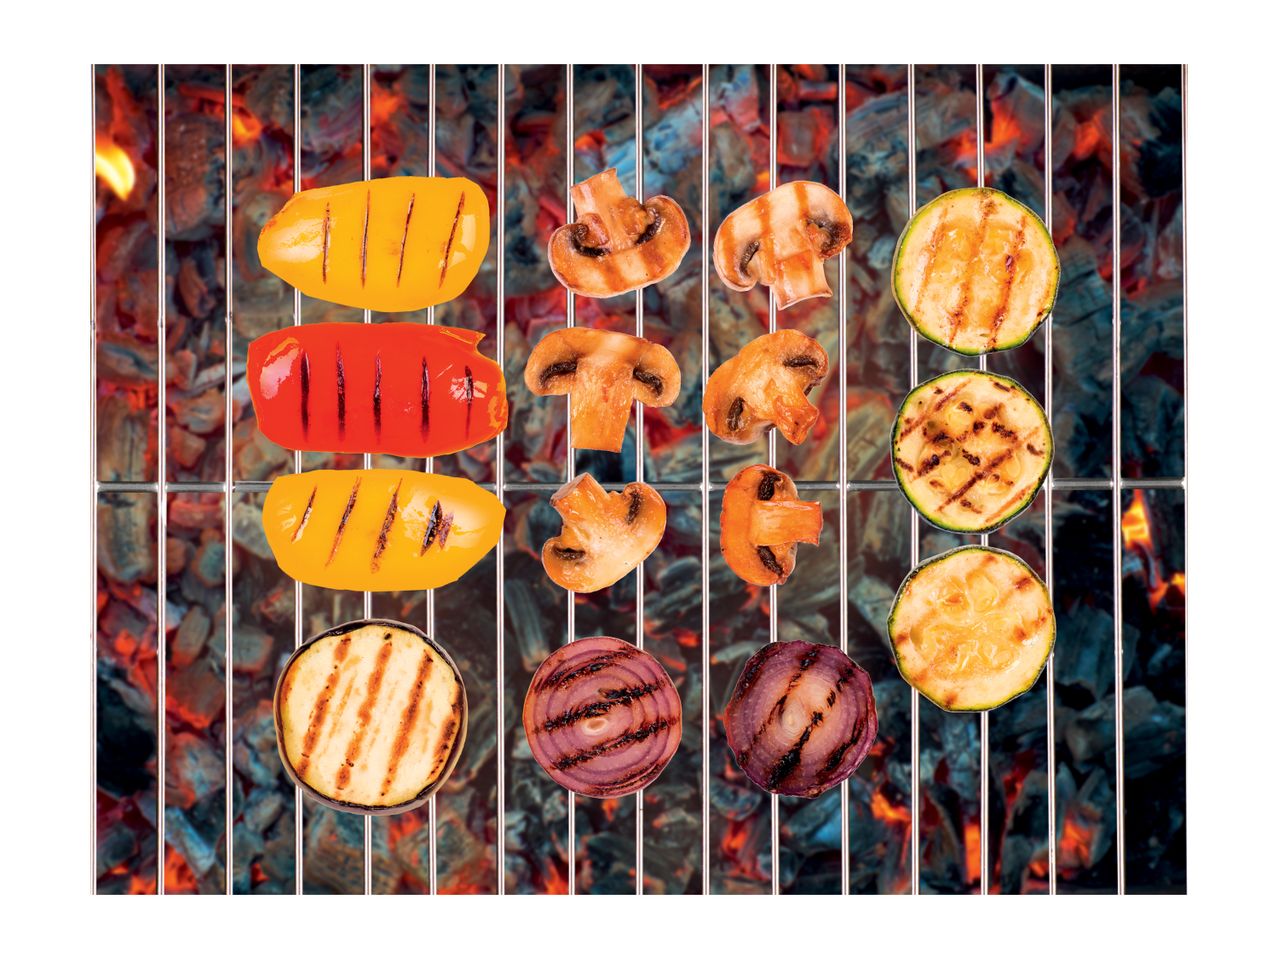 Go to full screen view: Grillmeister BBQ Basket - Image 17